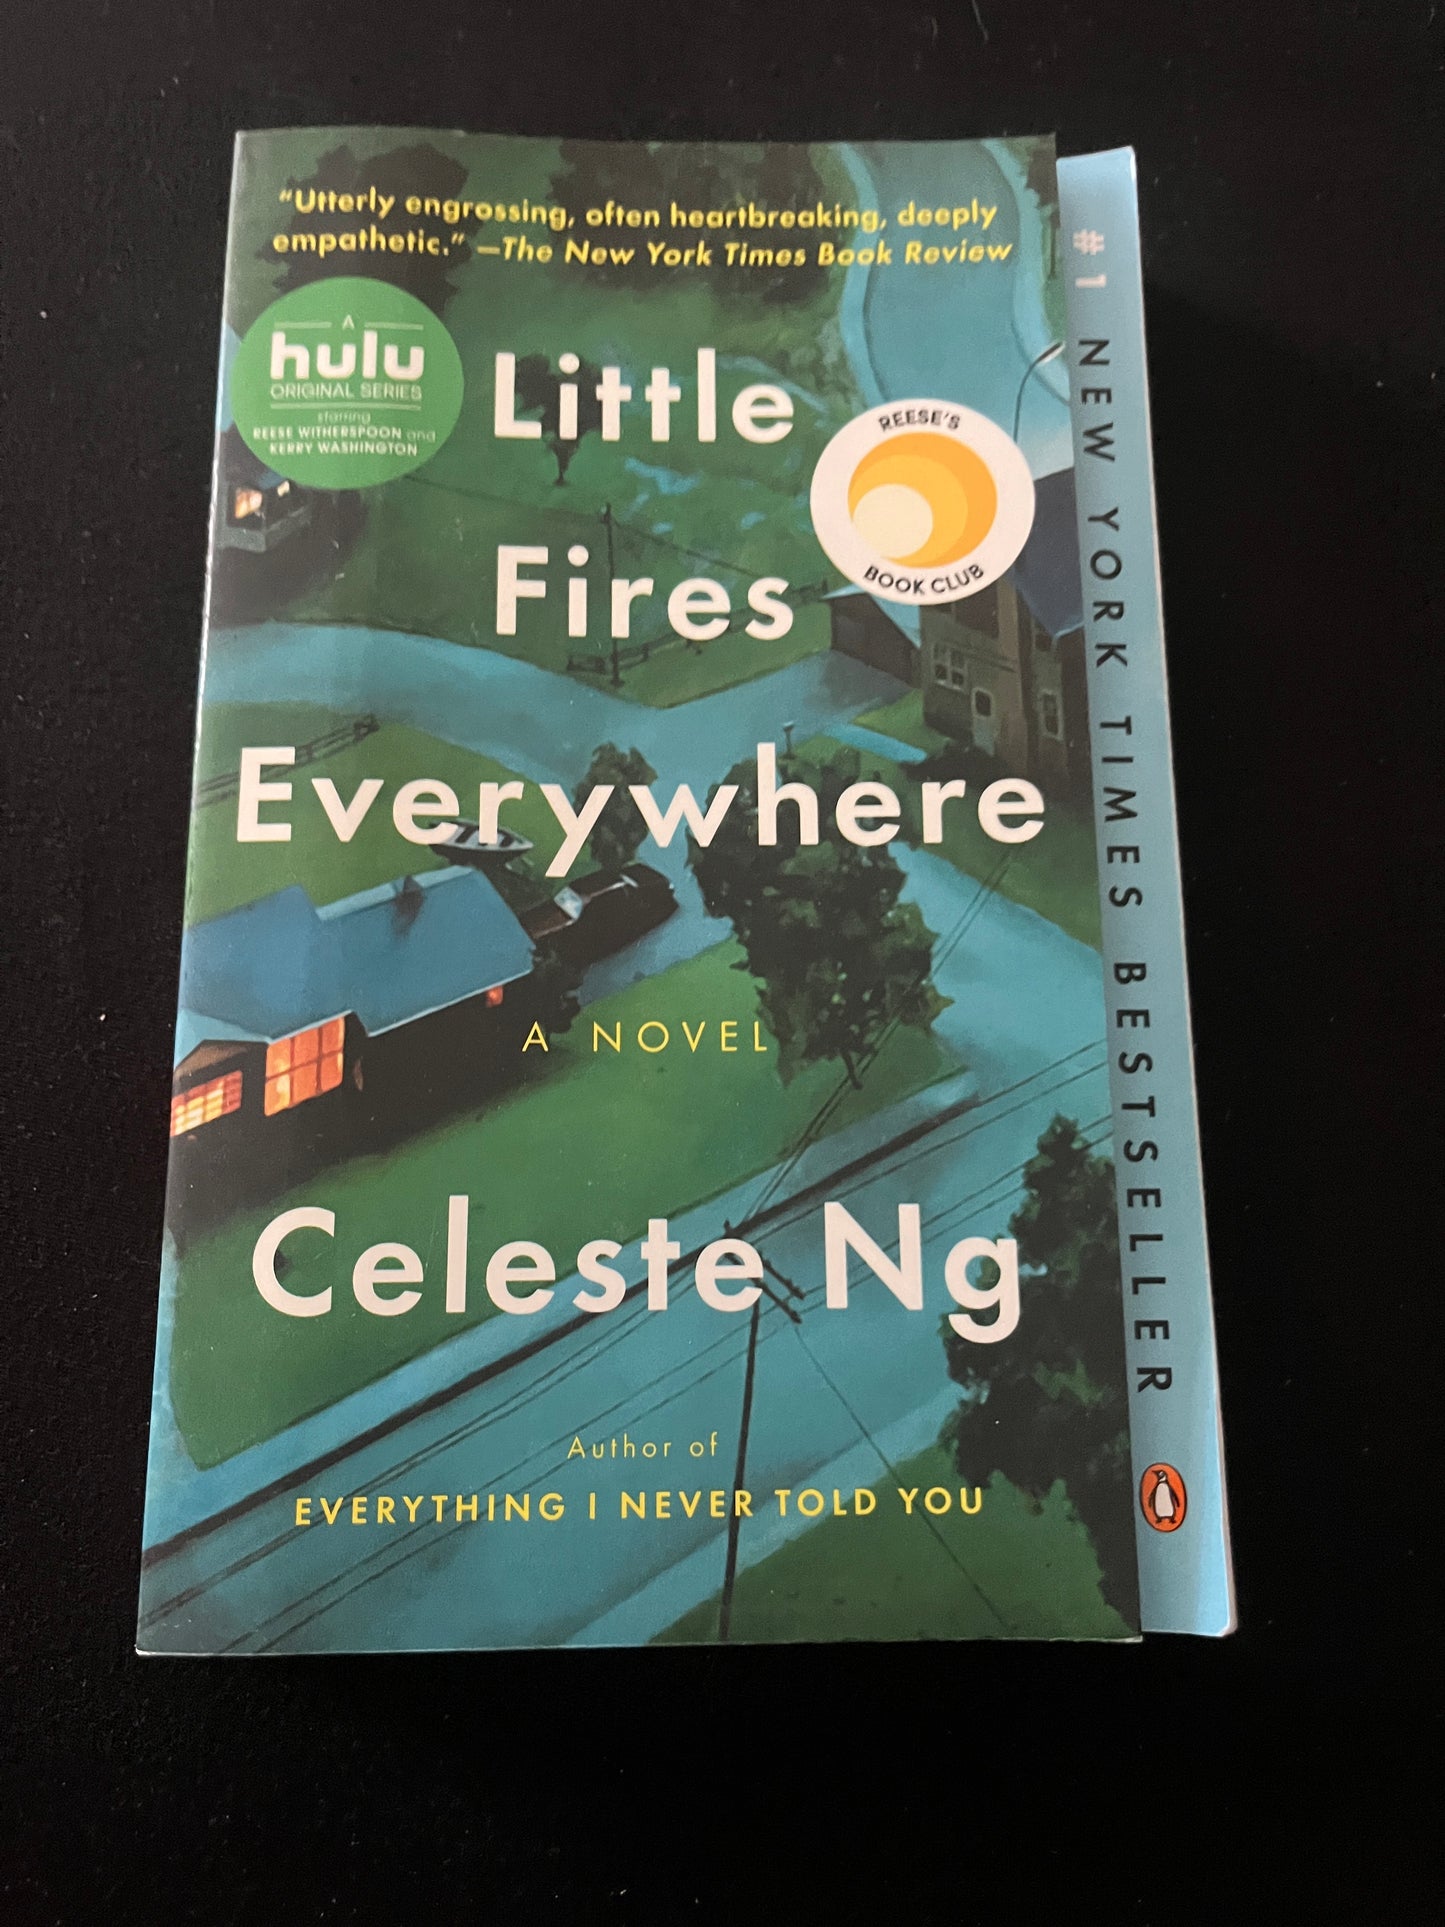 LITTLE FIRES EVERYWHERE by Celeste Ng